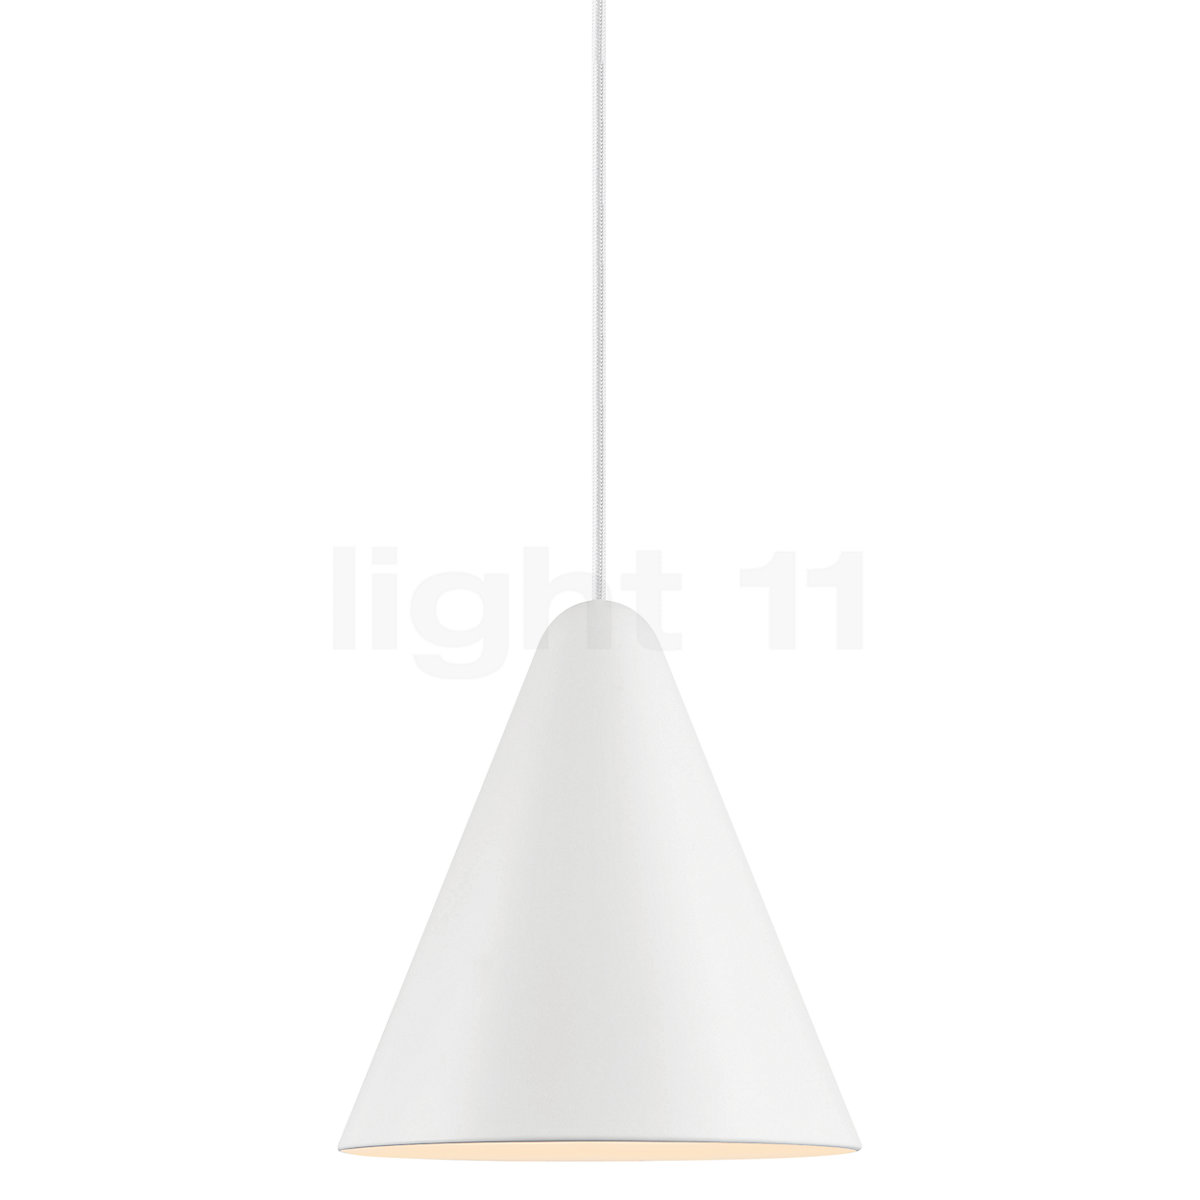 Light Buy Design for People at Pendant the Nono